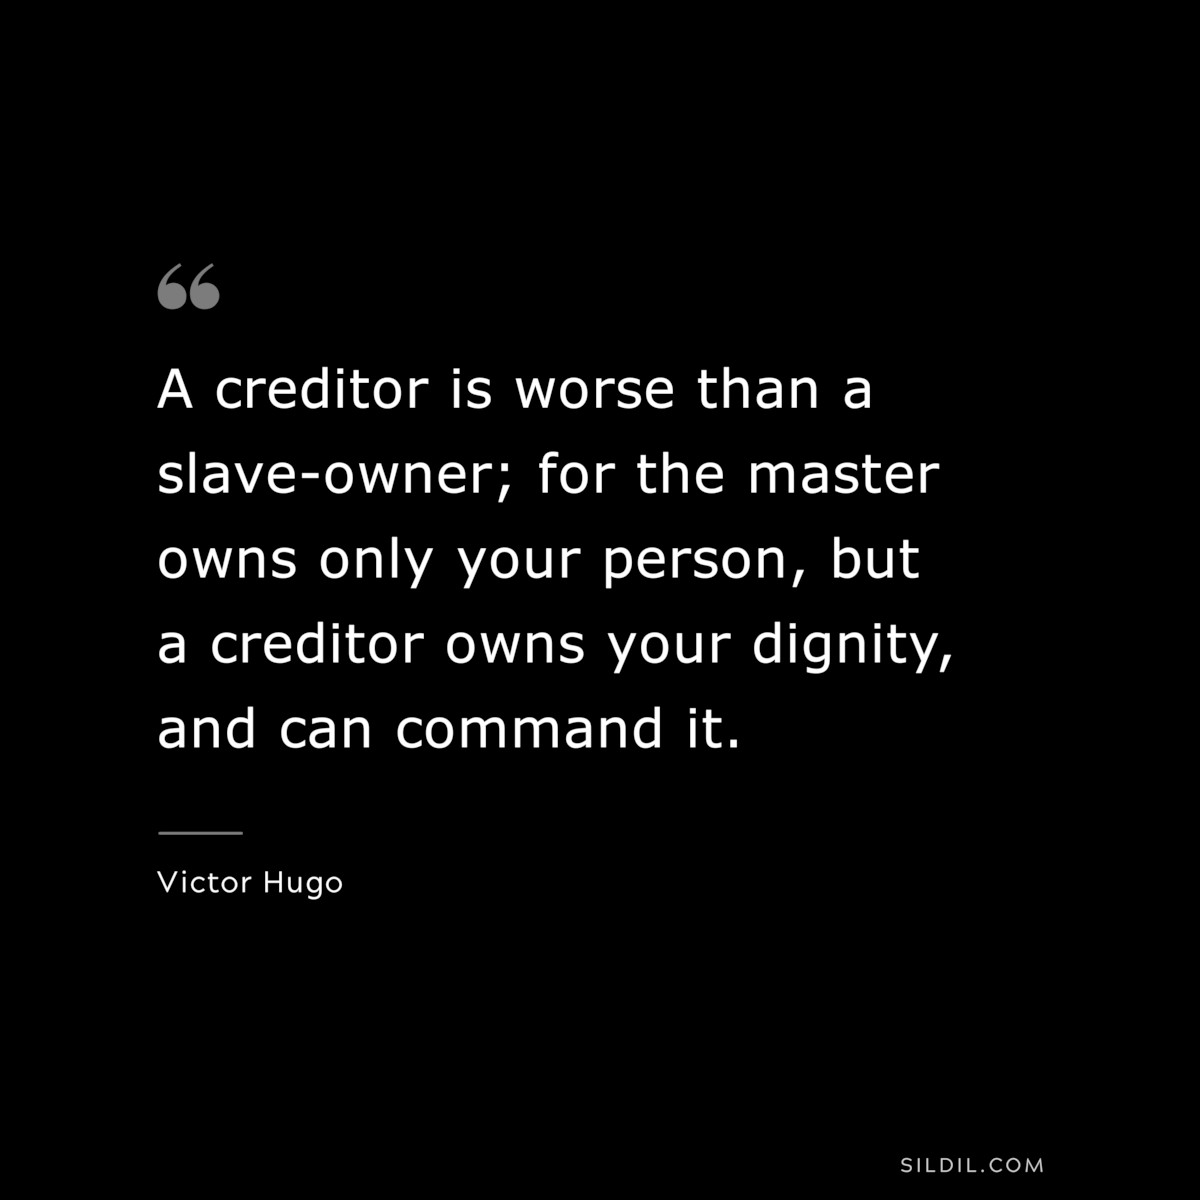 A creditor is worse than a slave-owner; for the master owns only your person, but a creditor owns your dignity, and can command it.― Victor Hugo